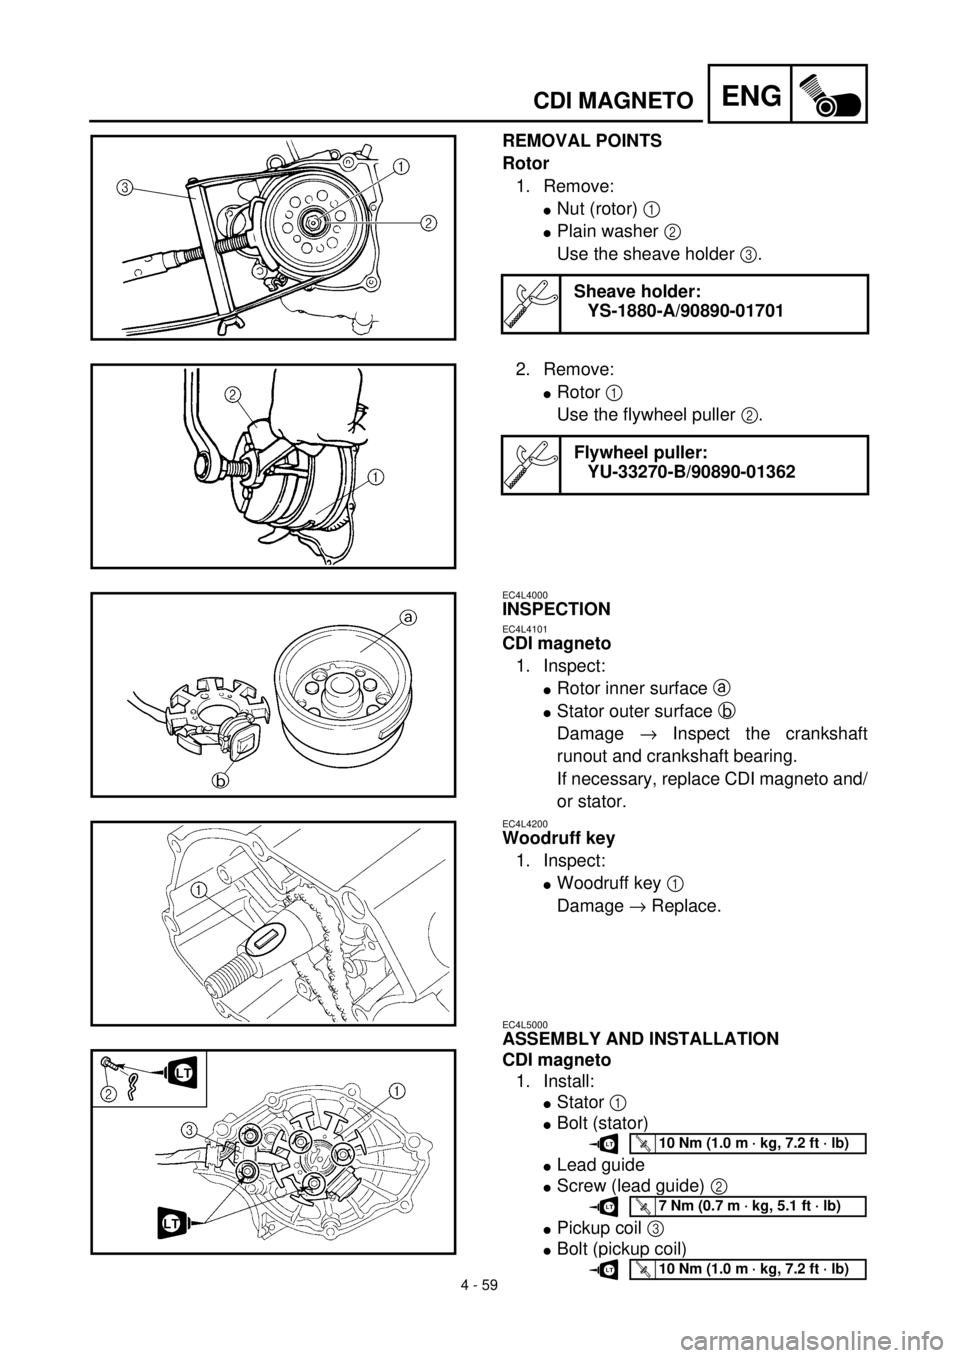 YAMAHA TTR125 2001  Owners Manual 4 - 59
ENGCDI MAGNETO
REMOVAL POINTS
Rotor
1. Remove:
lNut (rotor) 1 
lPlain washer 2 
Use the sheave holder 3.
Sheave holder:
YS-1880-A/90890-01701
2. Remove:
lRotor 1 
Use the flywheel puller 2.
Fly